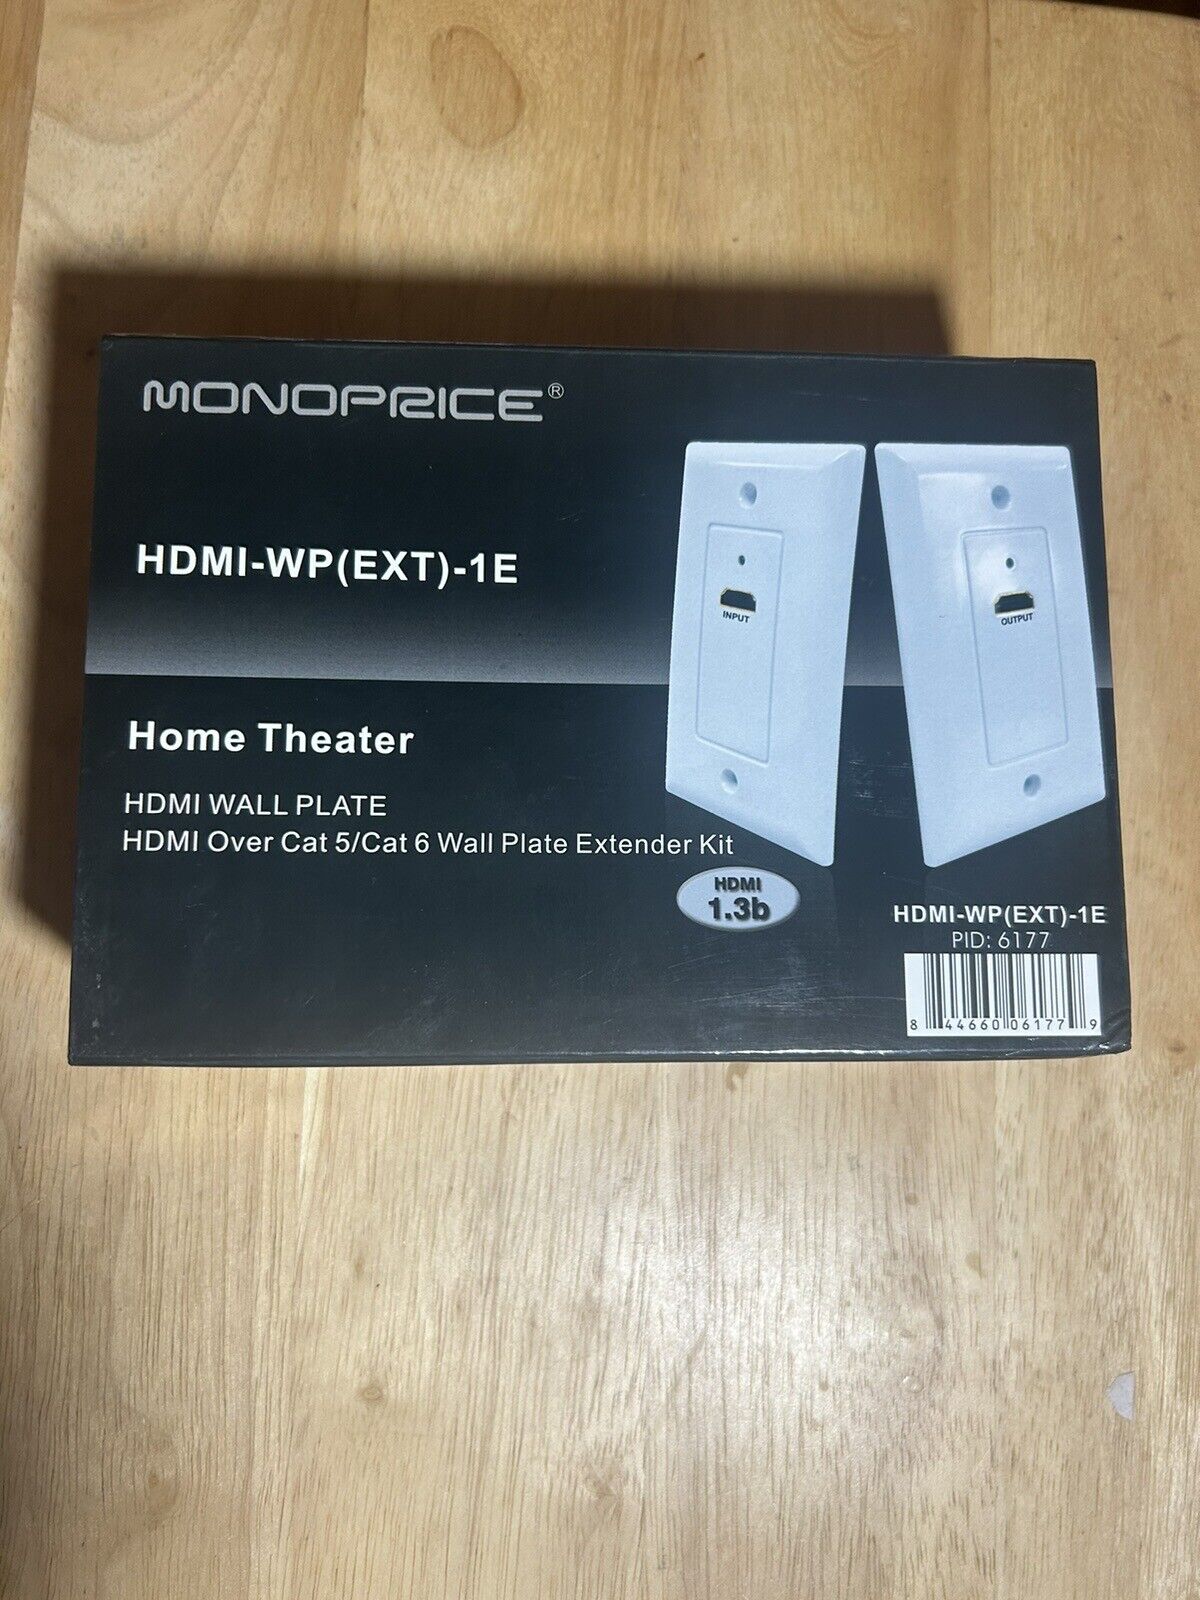 HDMI Wall Plate with built-in extender over CAT5e CAT6 cable